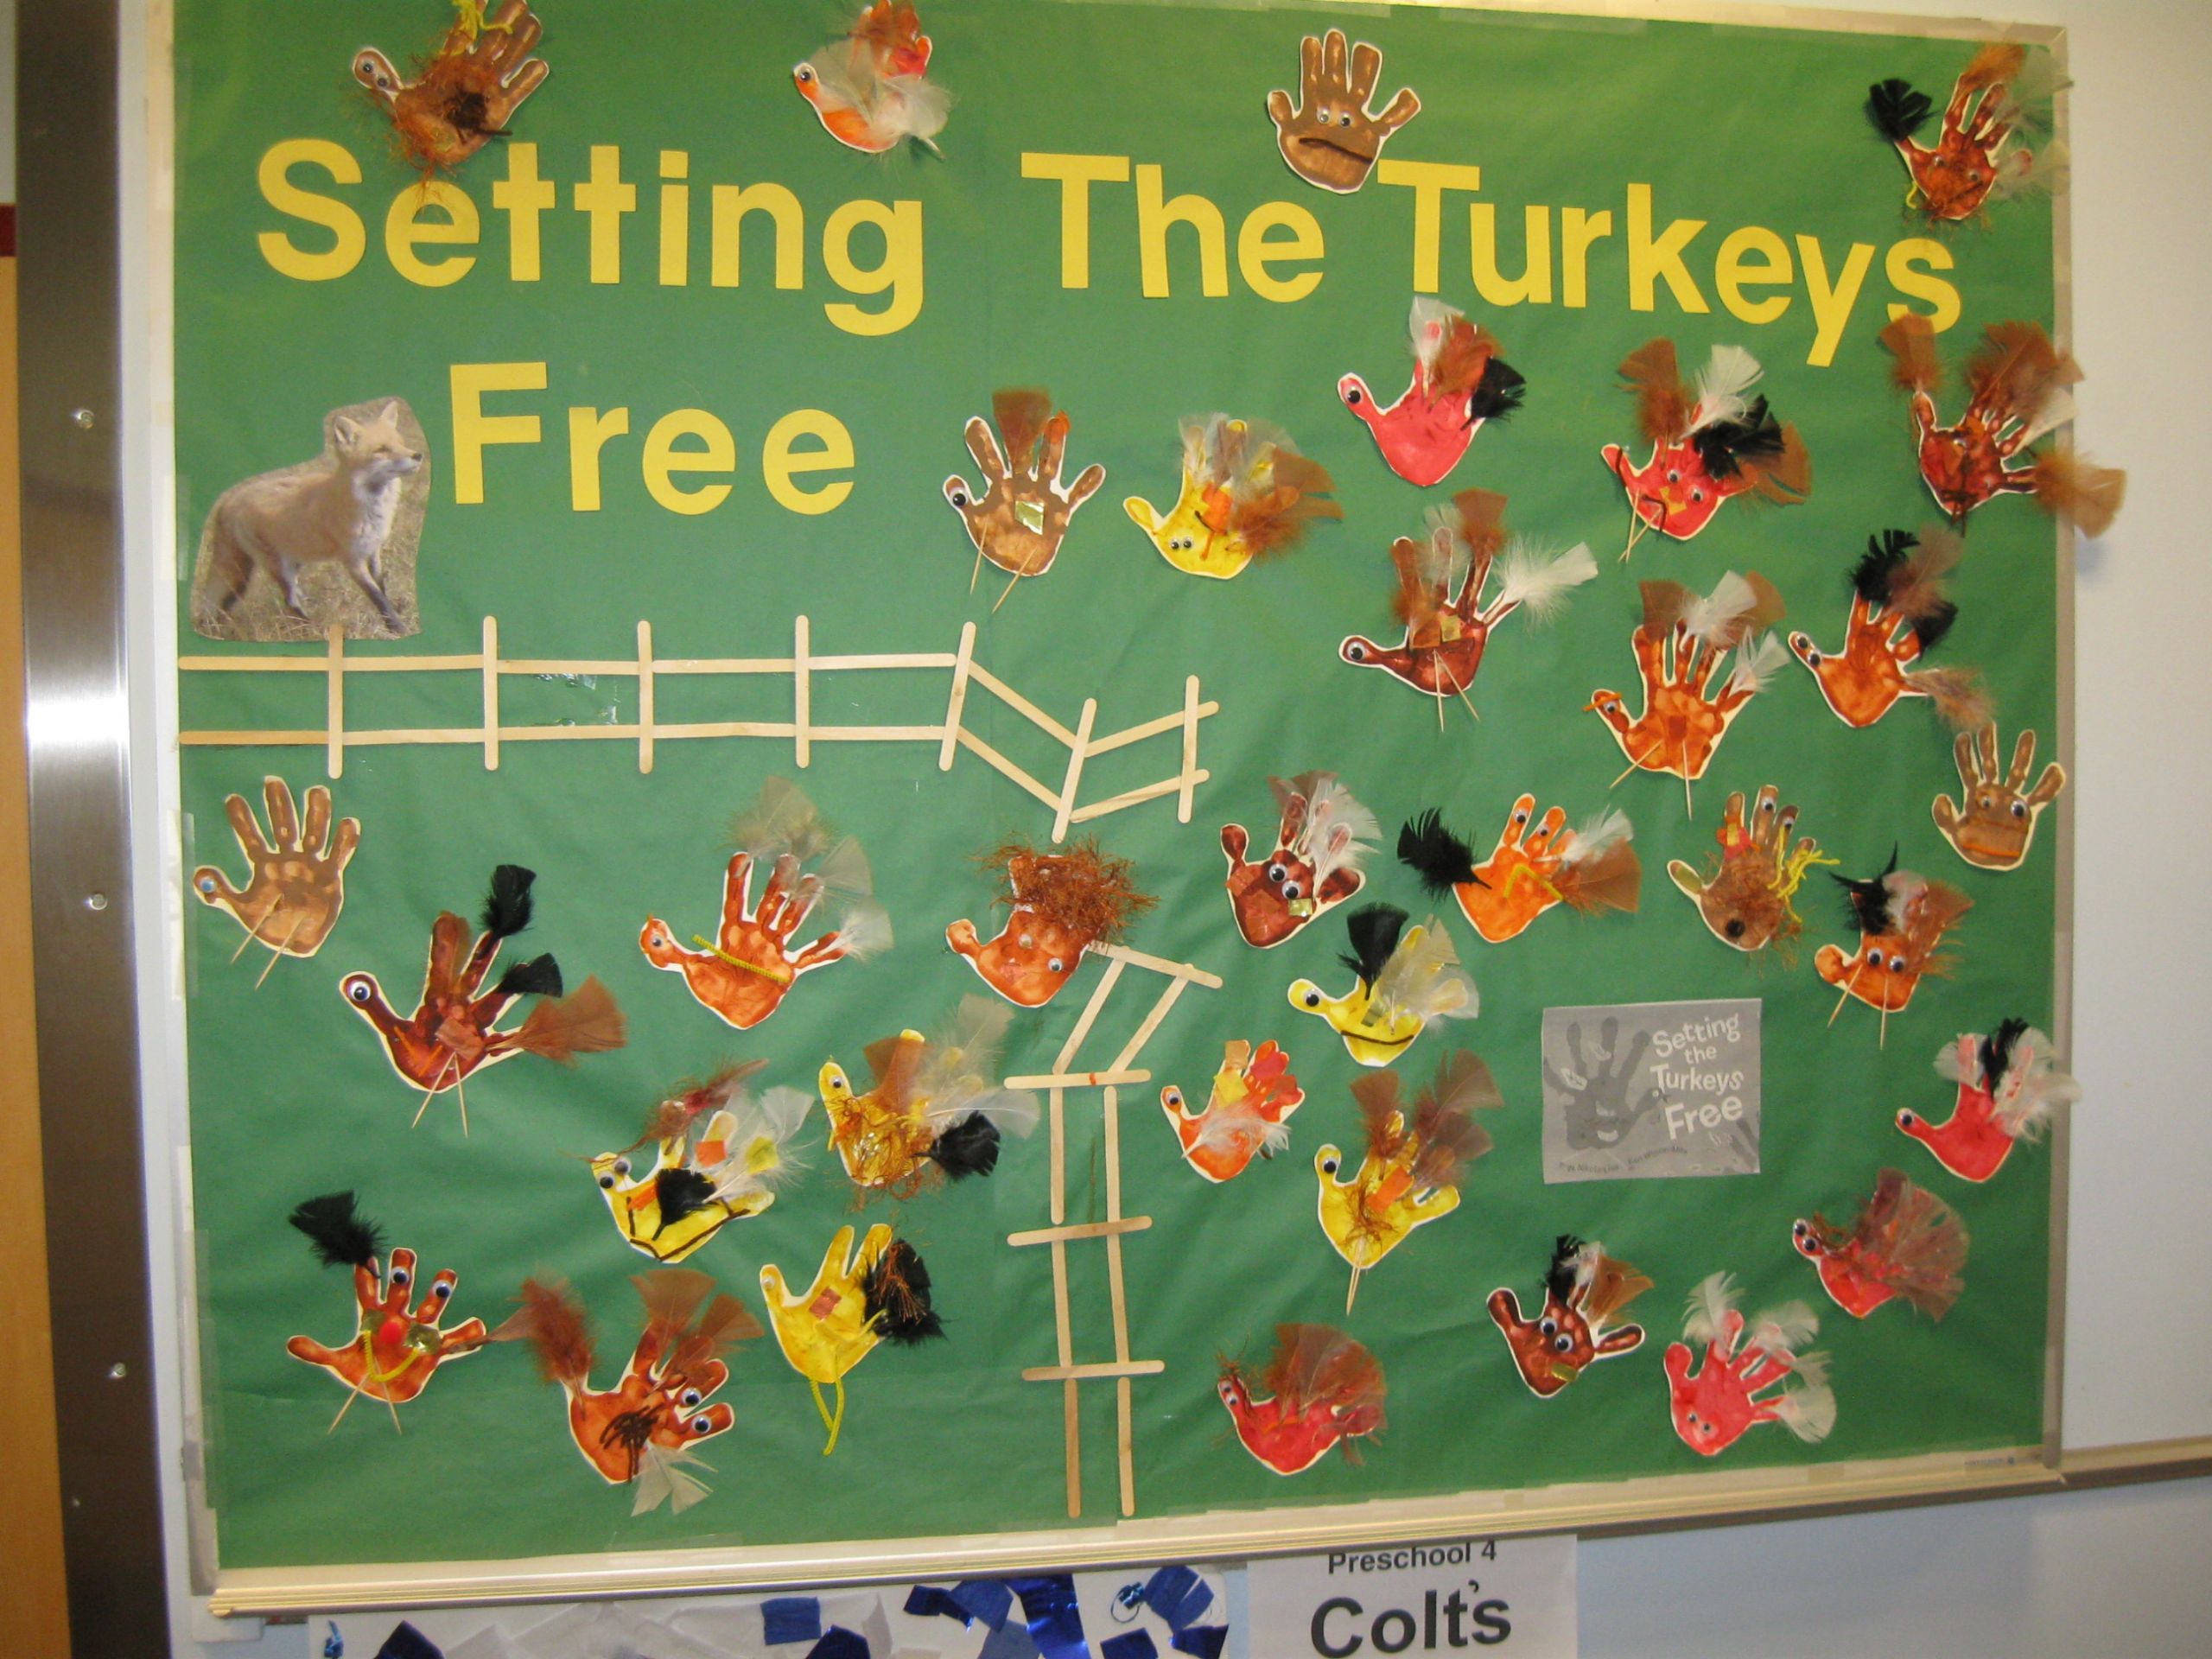 24-of-the-best-ideas-for-thanksgiving-bulletin-board-ideas-for-preschool-home-family-style